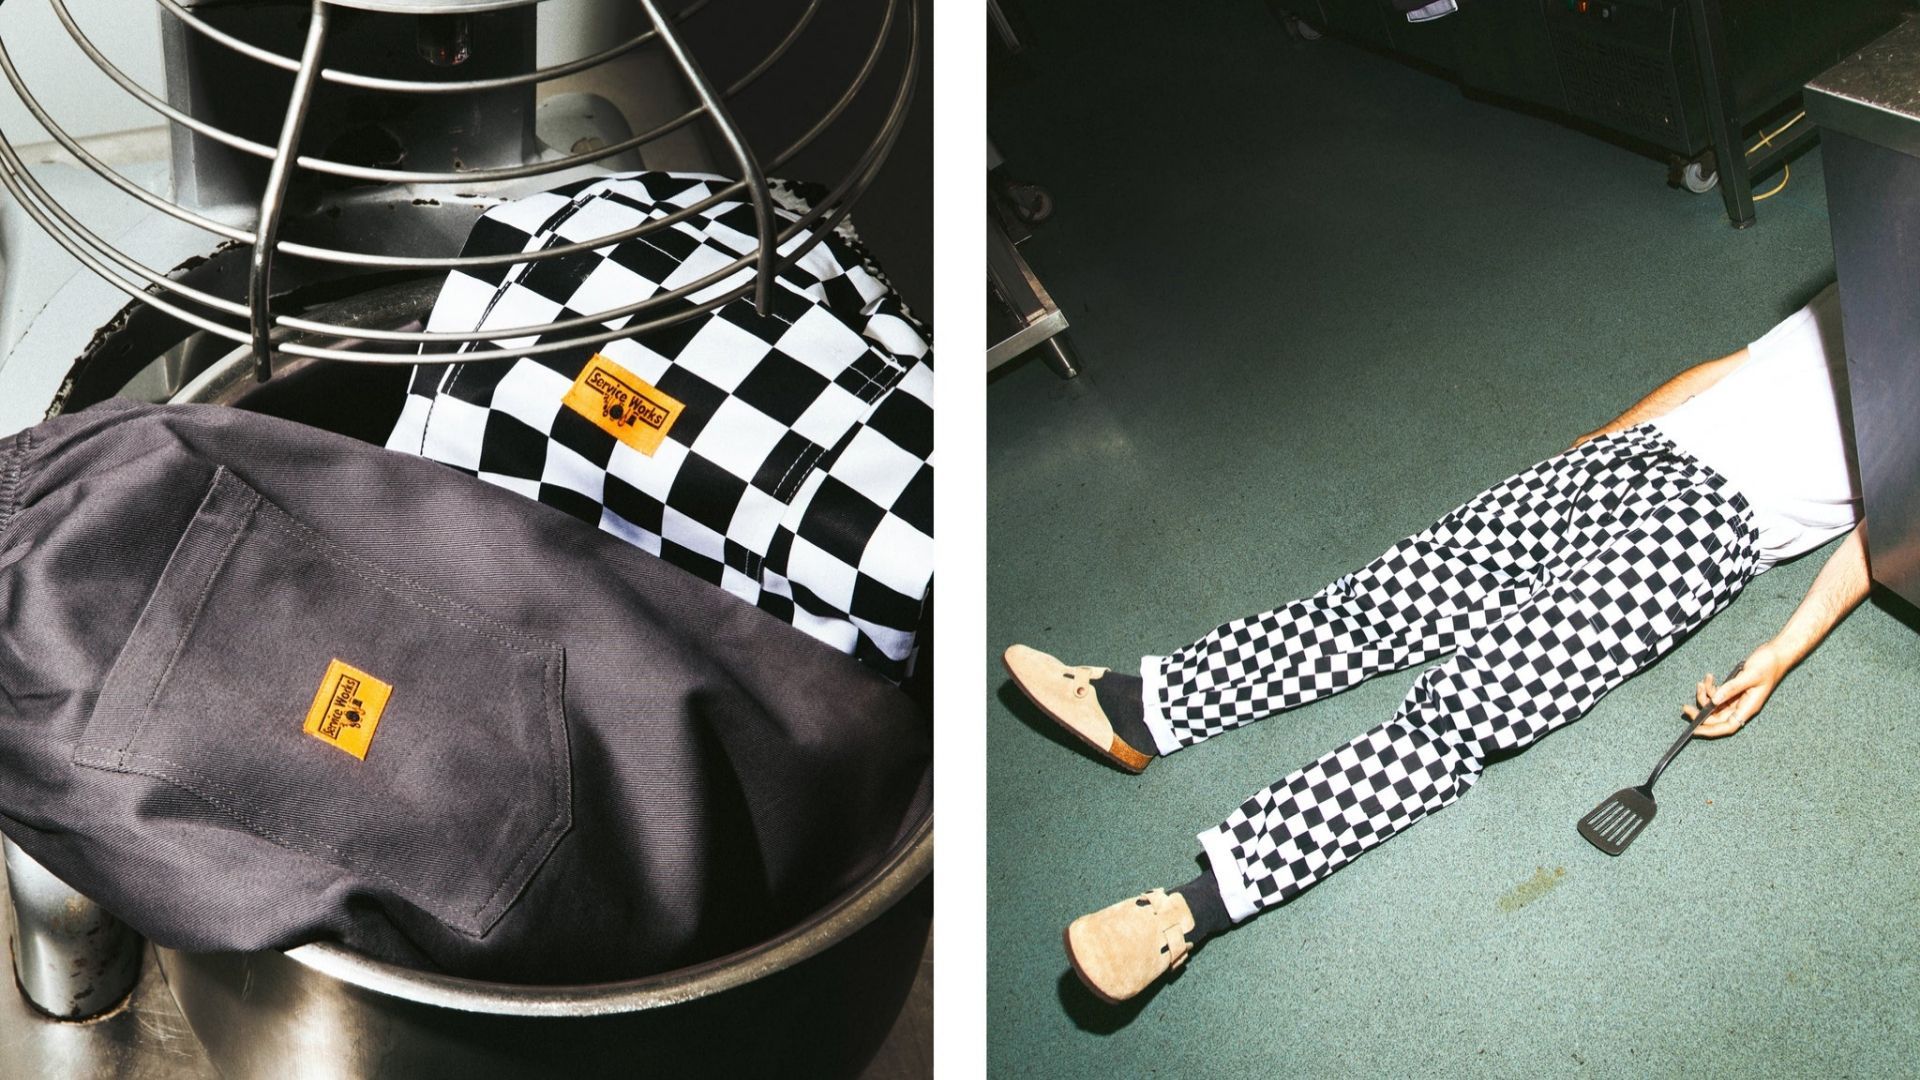 Left: A pair of black and white checkered pants with a yellow tag on the left leg. Right: A person laying on the ground wearing checkered pants and a white shirt. - Chefcore